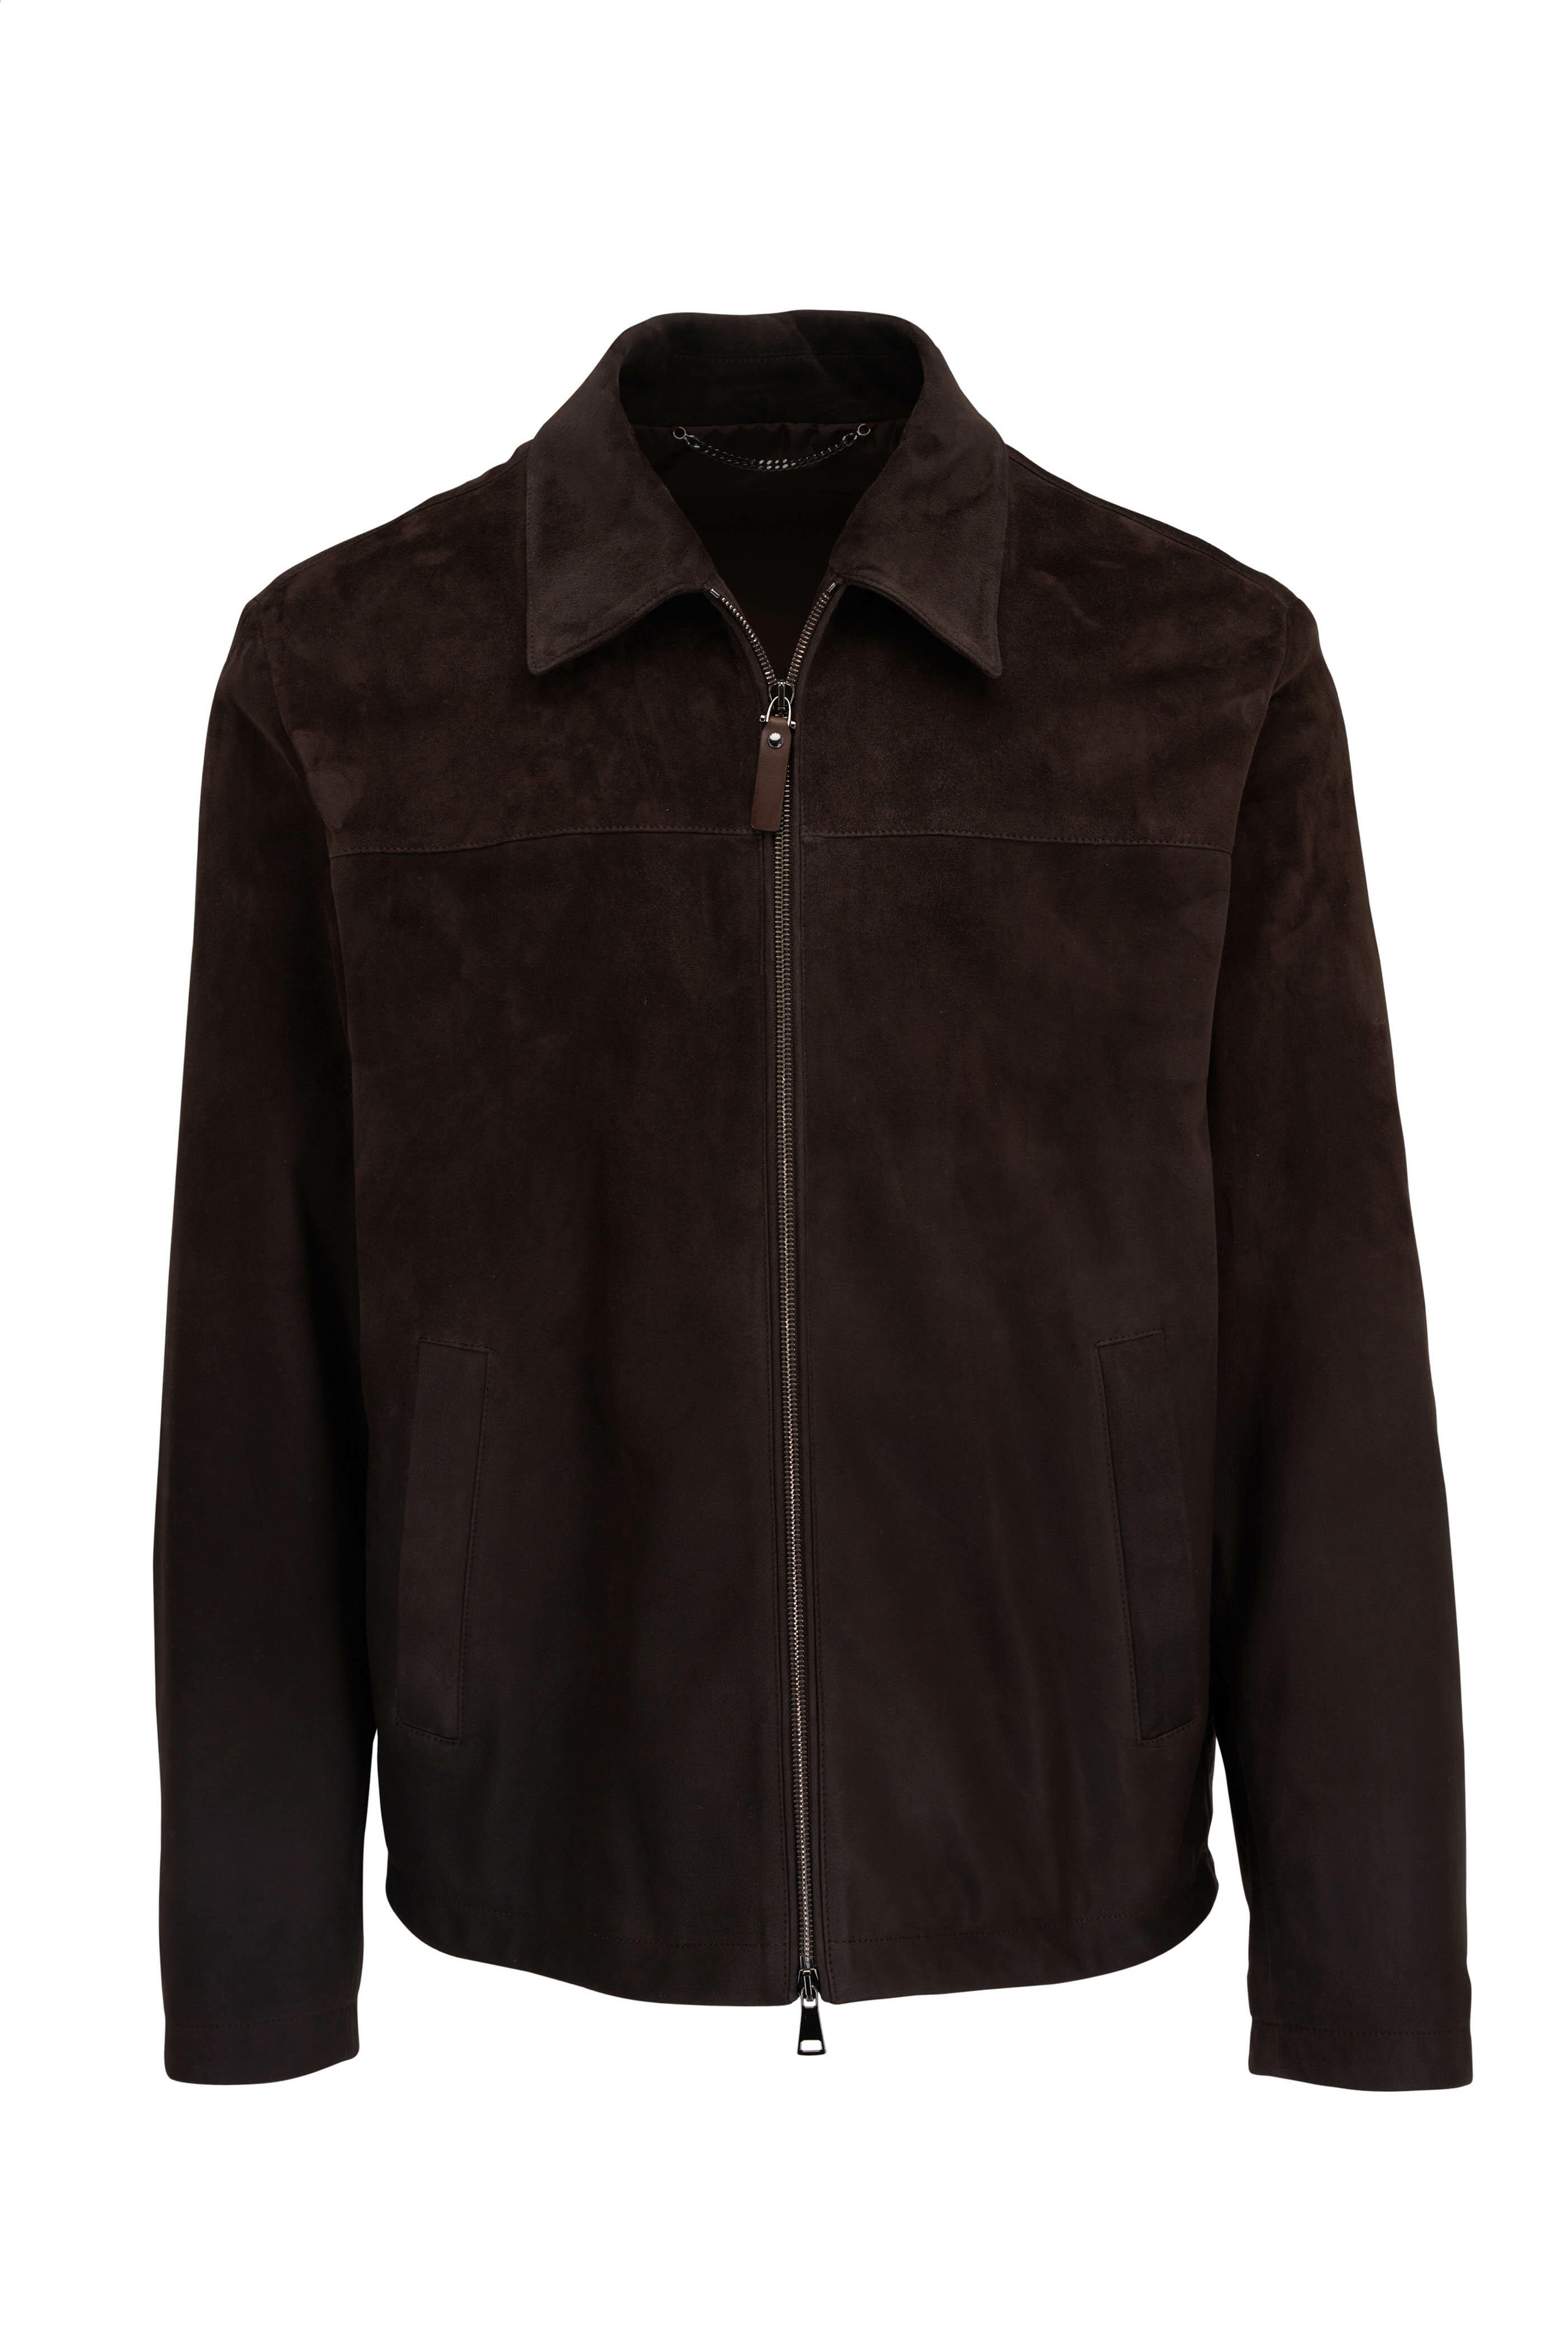 Canali - Brown Suede Degradé Bomber Jacket | Mitchell Stores